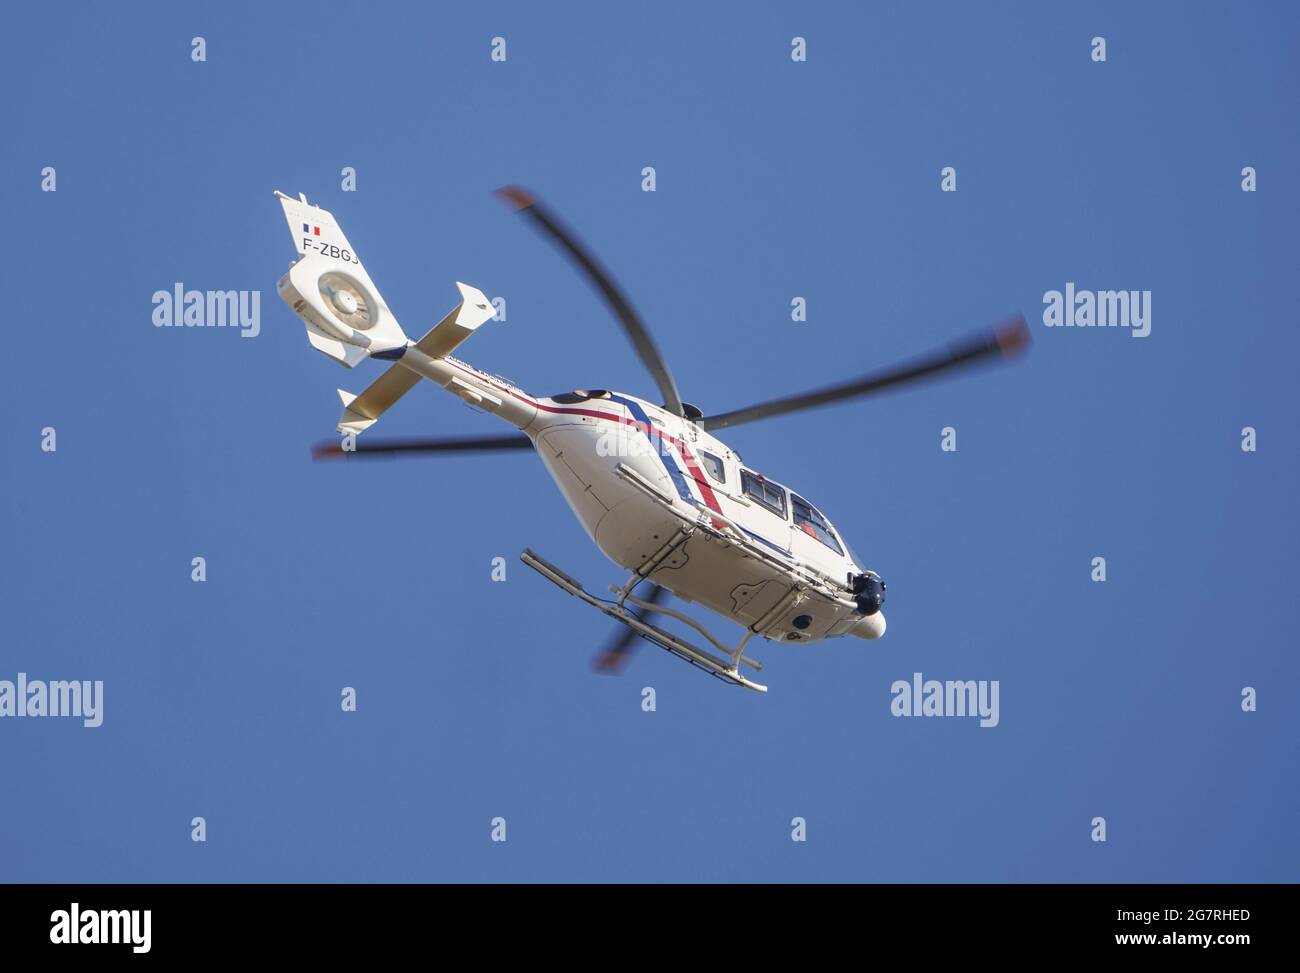 French helicopter, customs service, Spain. Stock Photo